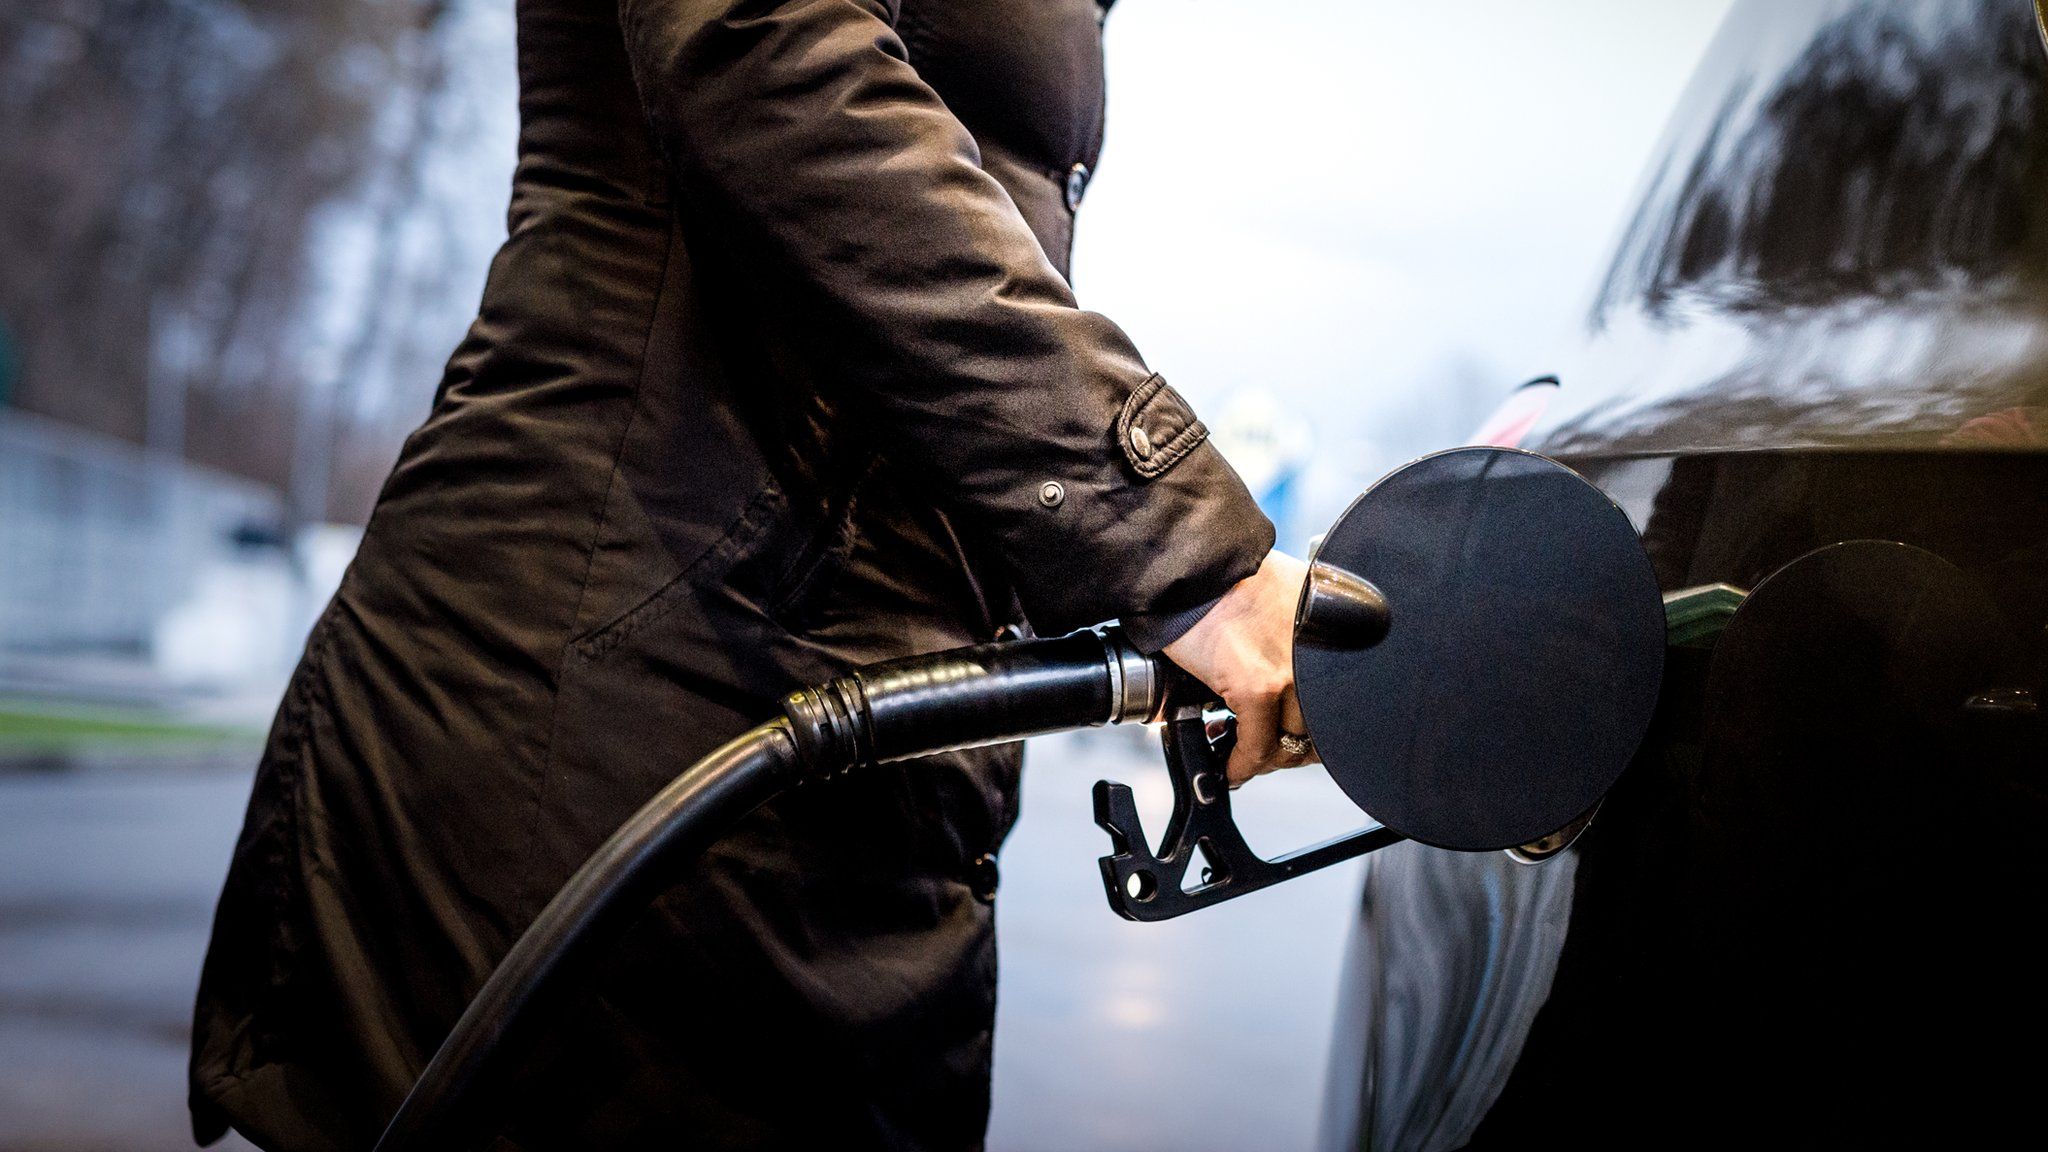 Woman wearing a coat filling up a car with fuel.